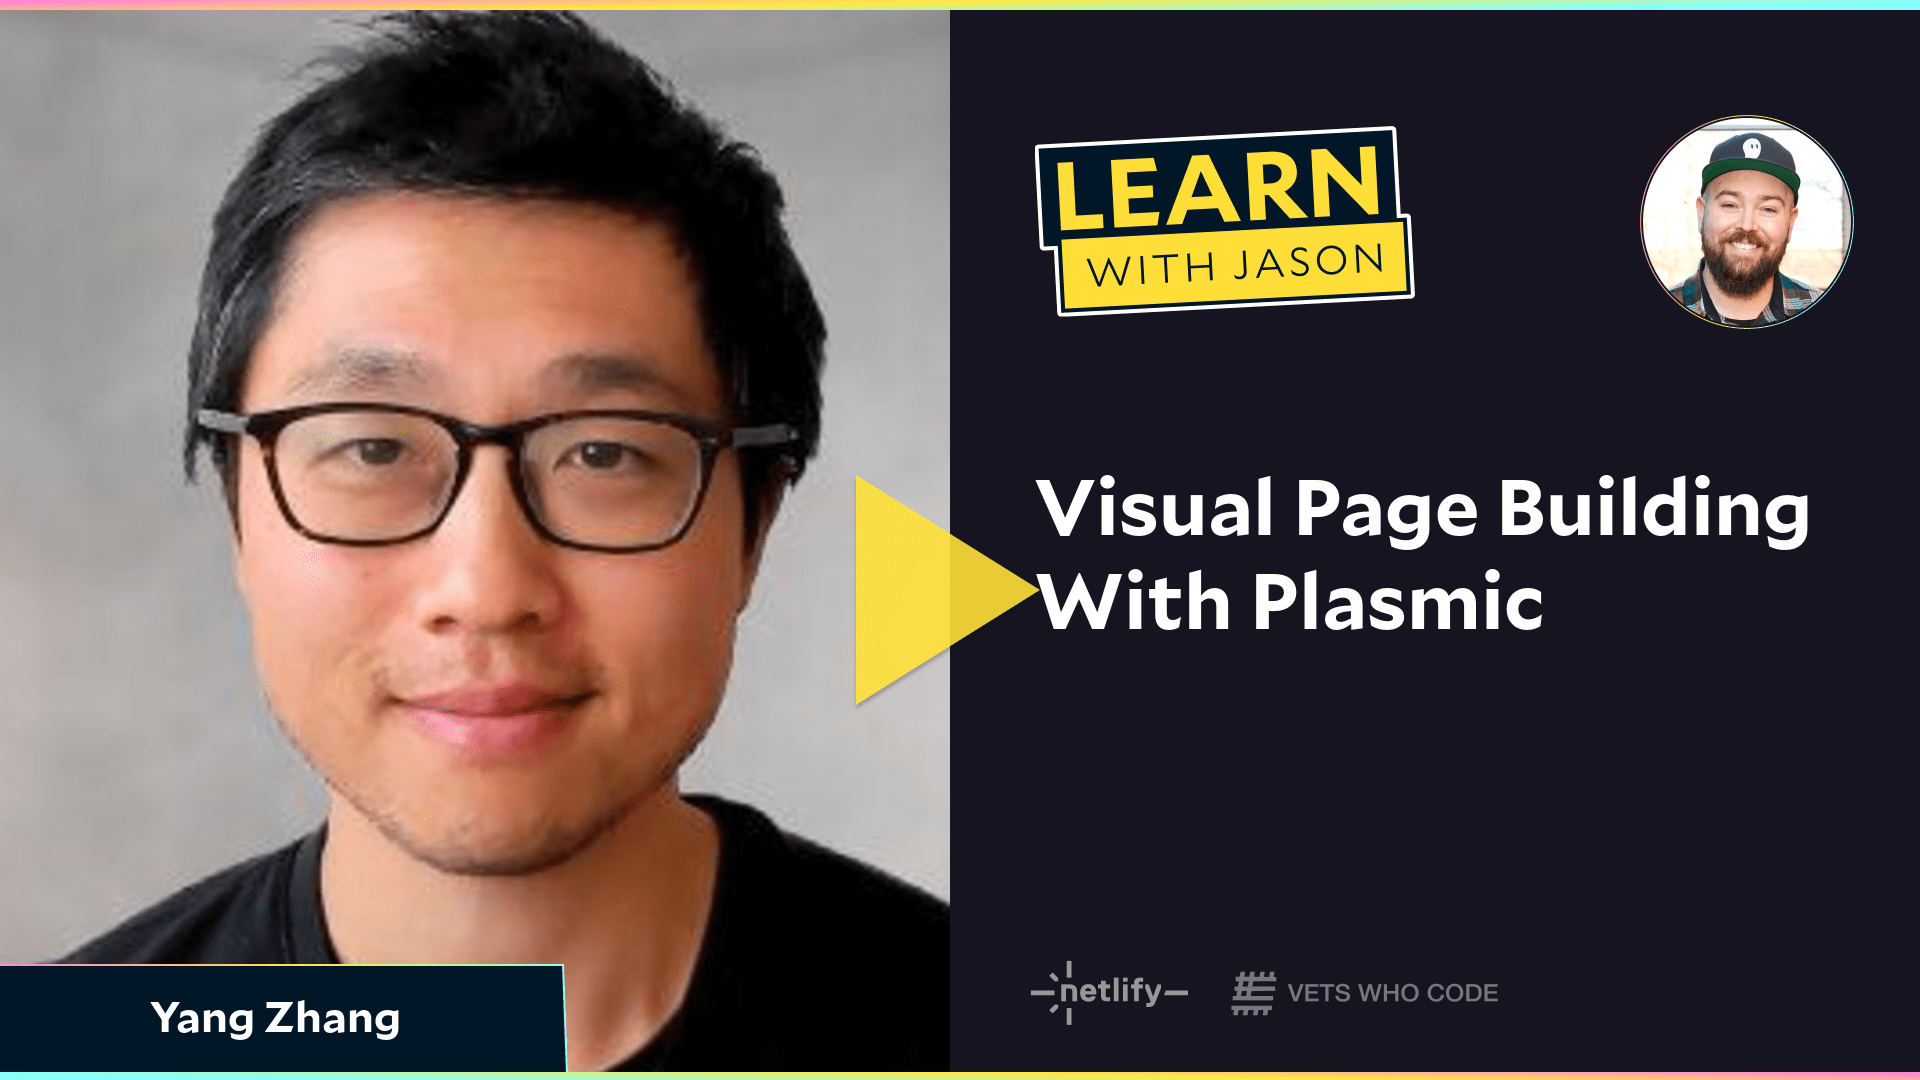 Visual Page Building With Plasmic (with Yang Zhang)